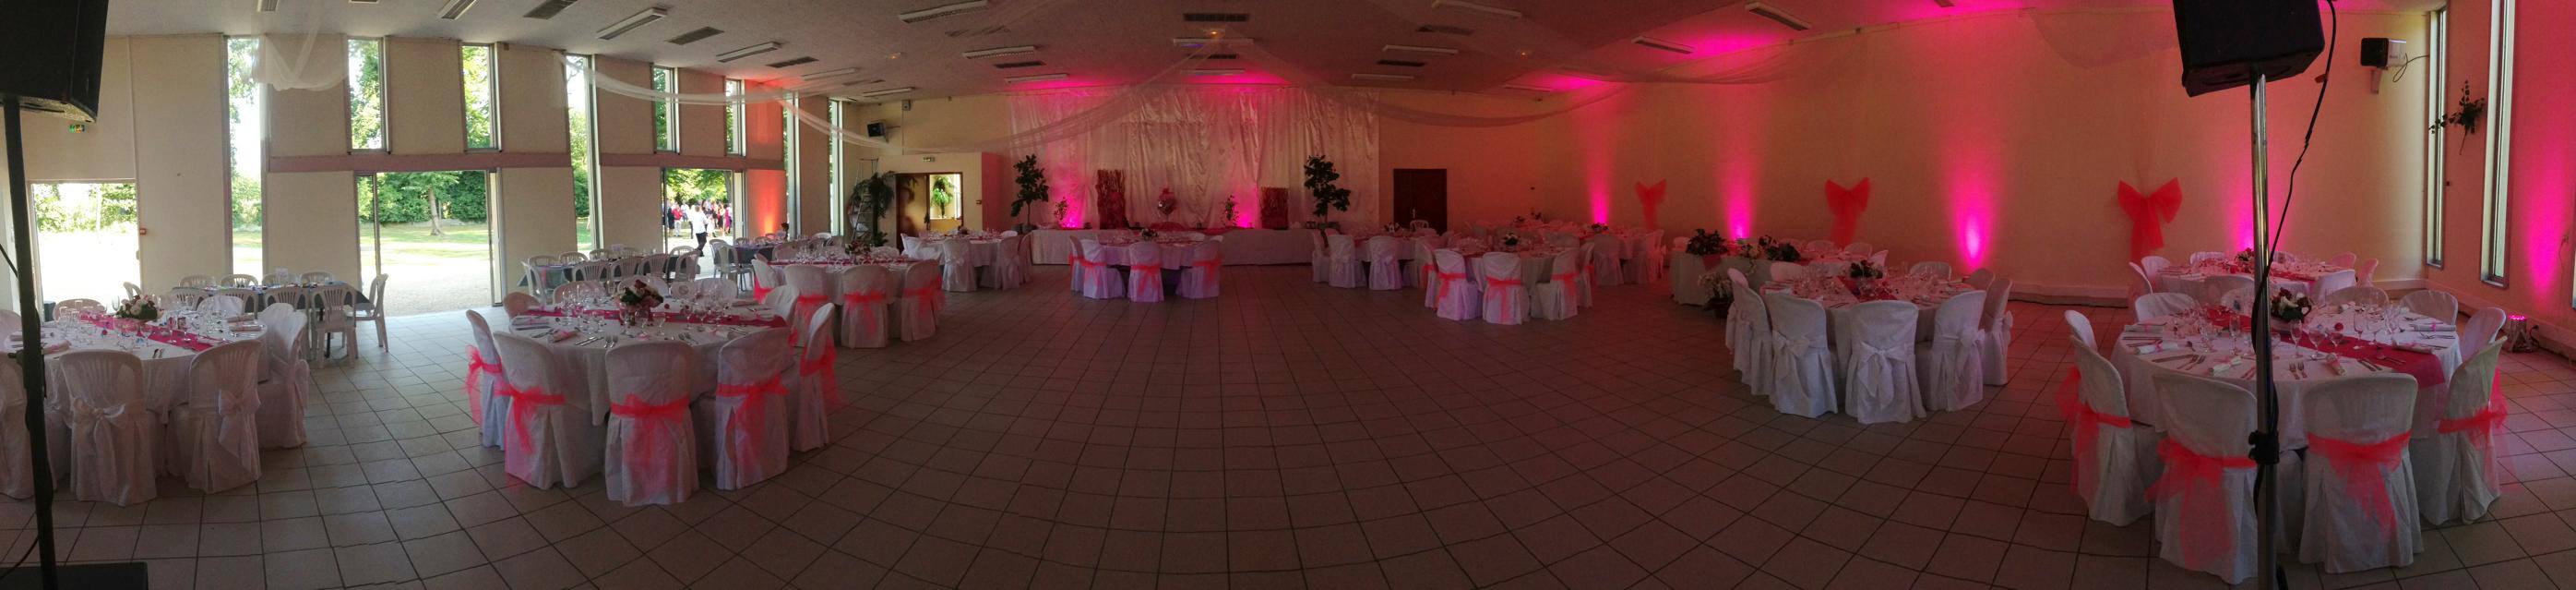 salle mariage verneuil